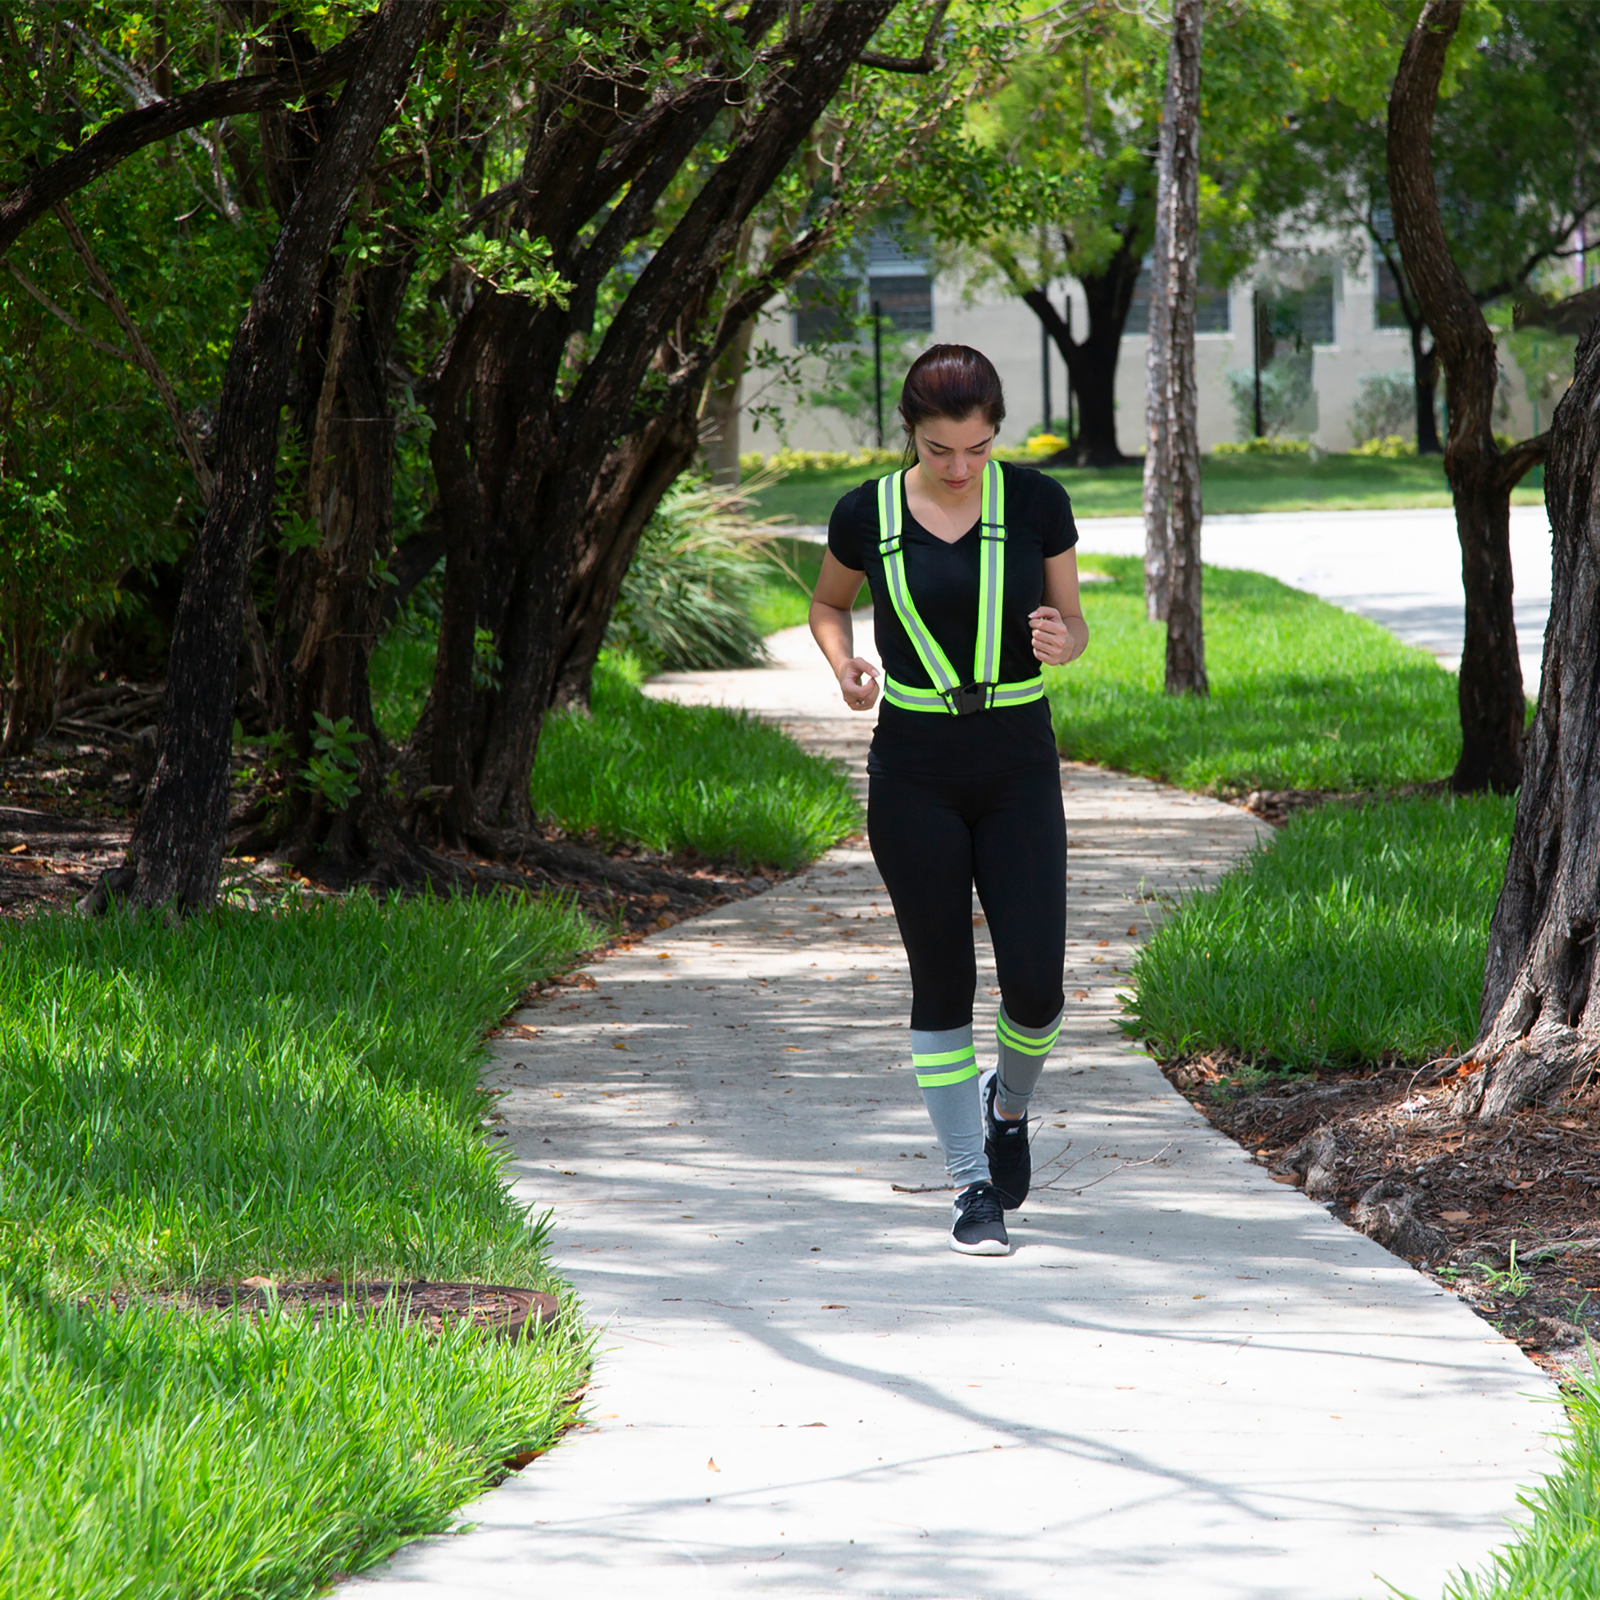 A person wearing a JORESTECH safety suspender for jogging next to the road